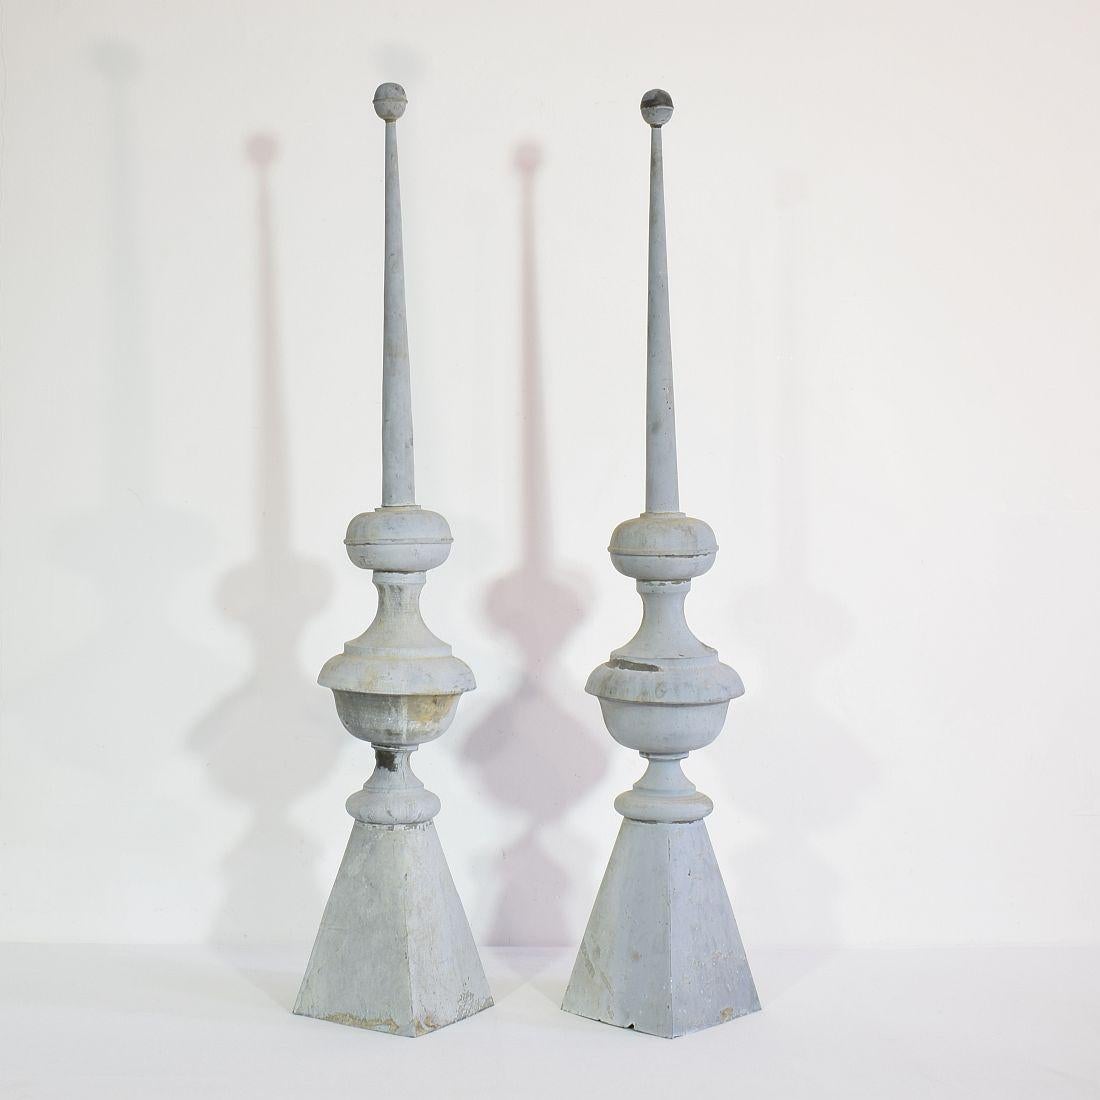 Great and rare couple of zinc finials, France circa 1850-1900. Weathered, small losses and old repairs.